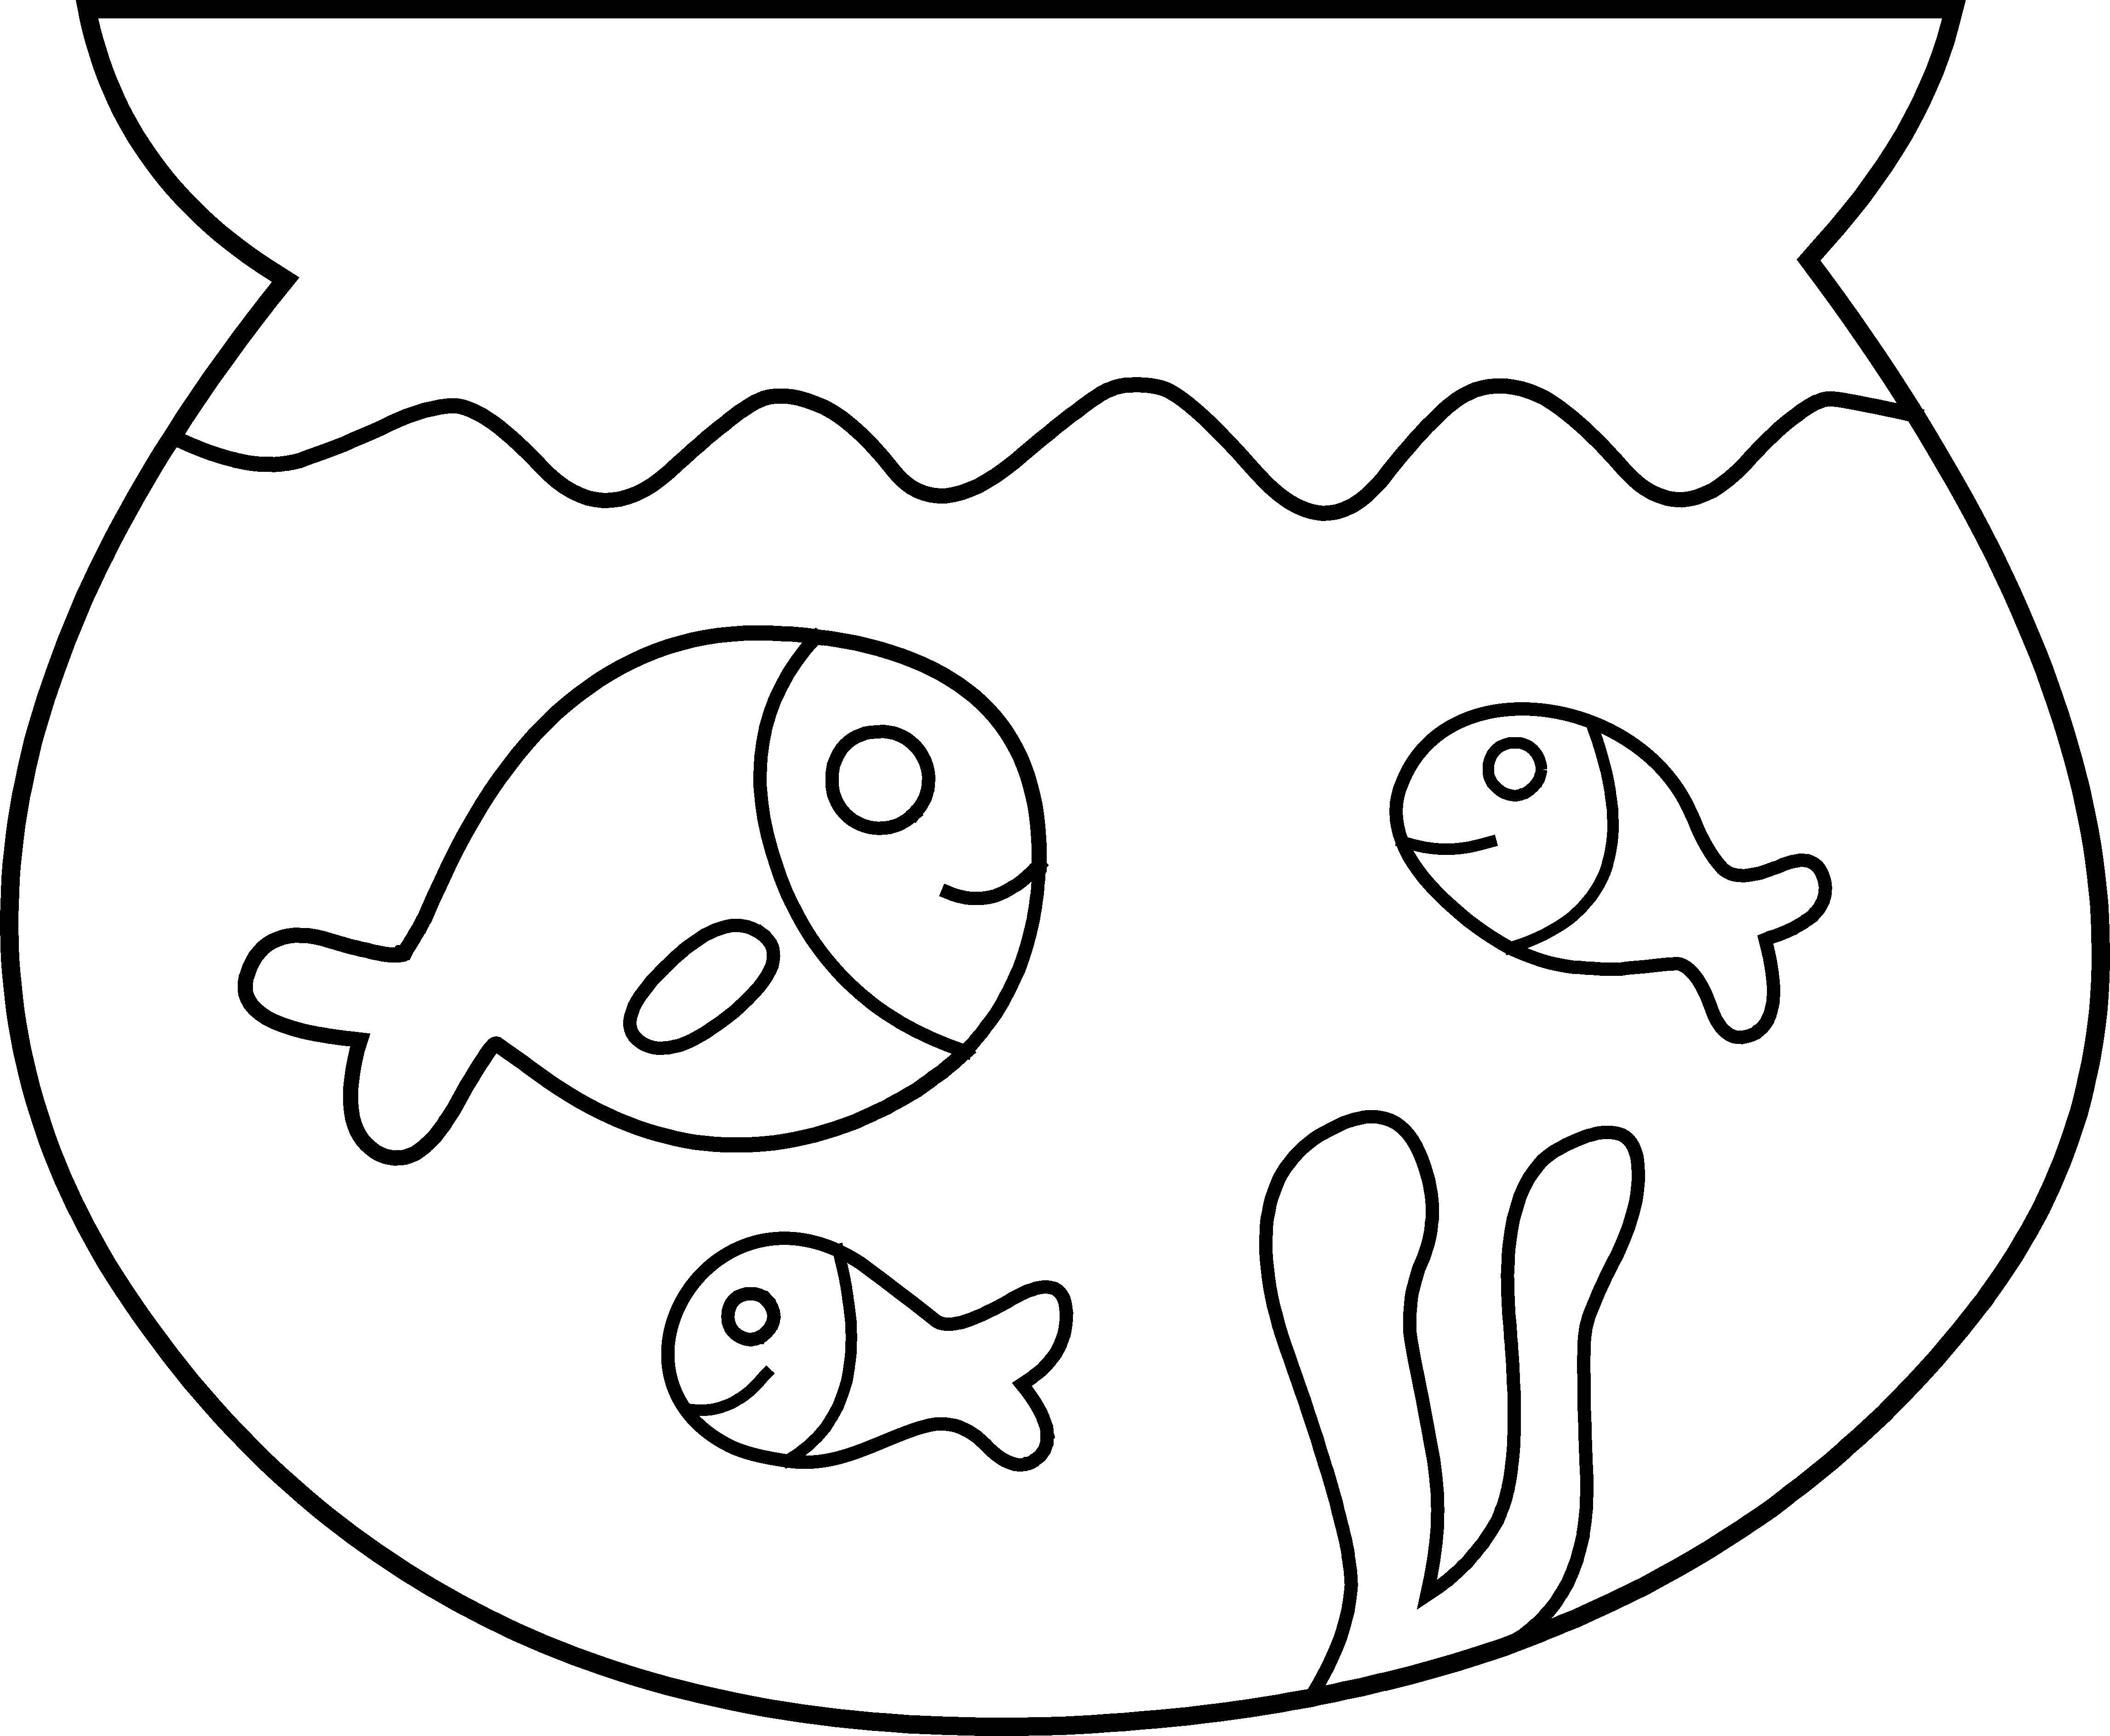 Coloring The fish in the aquarium. Category coloring for little ones. Tags:  Fish, aquarium.